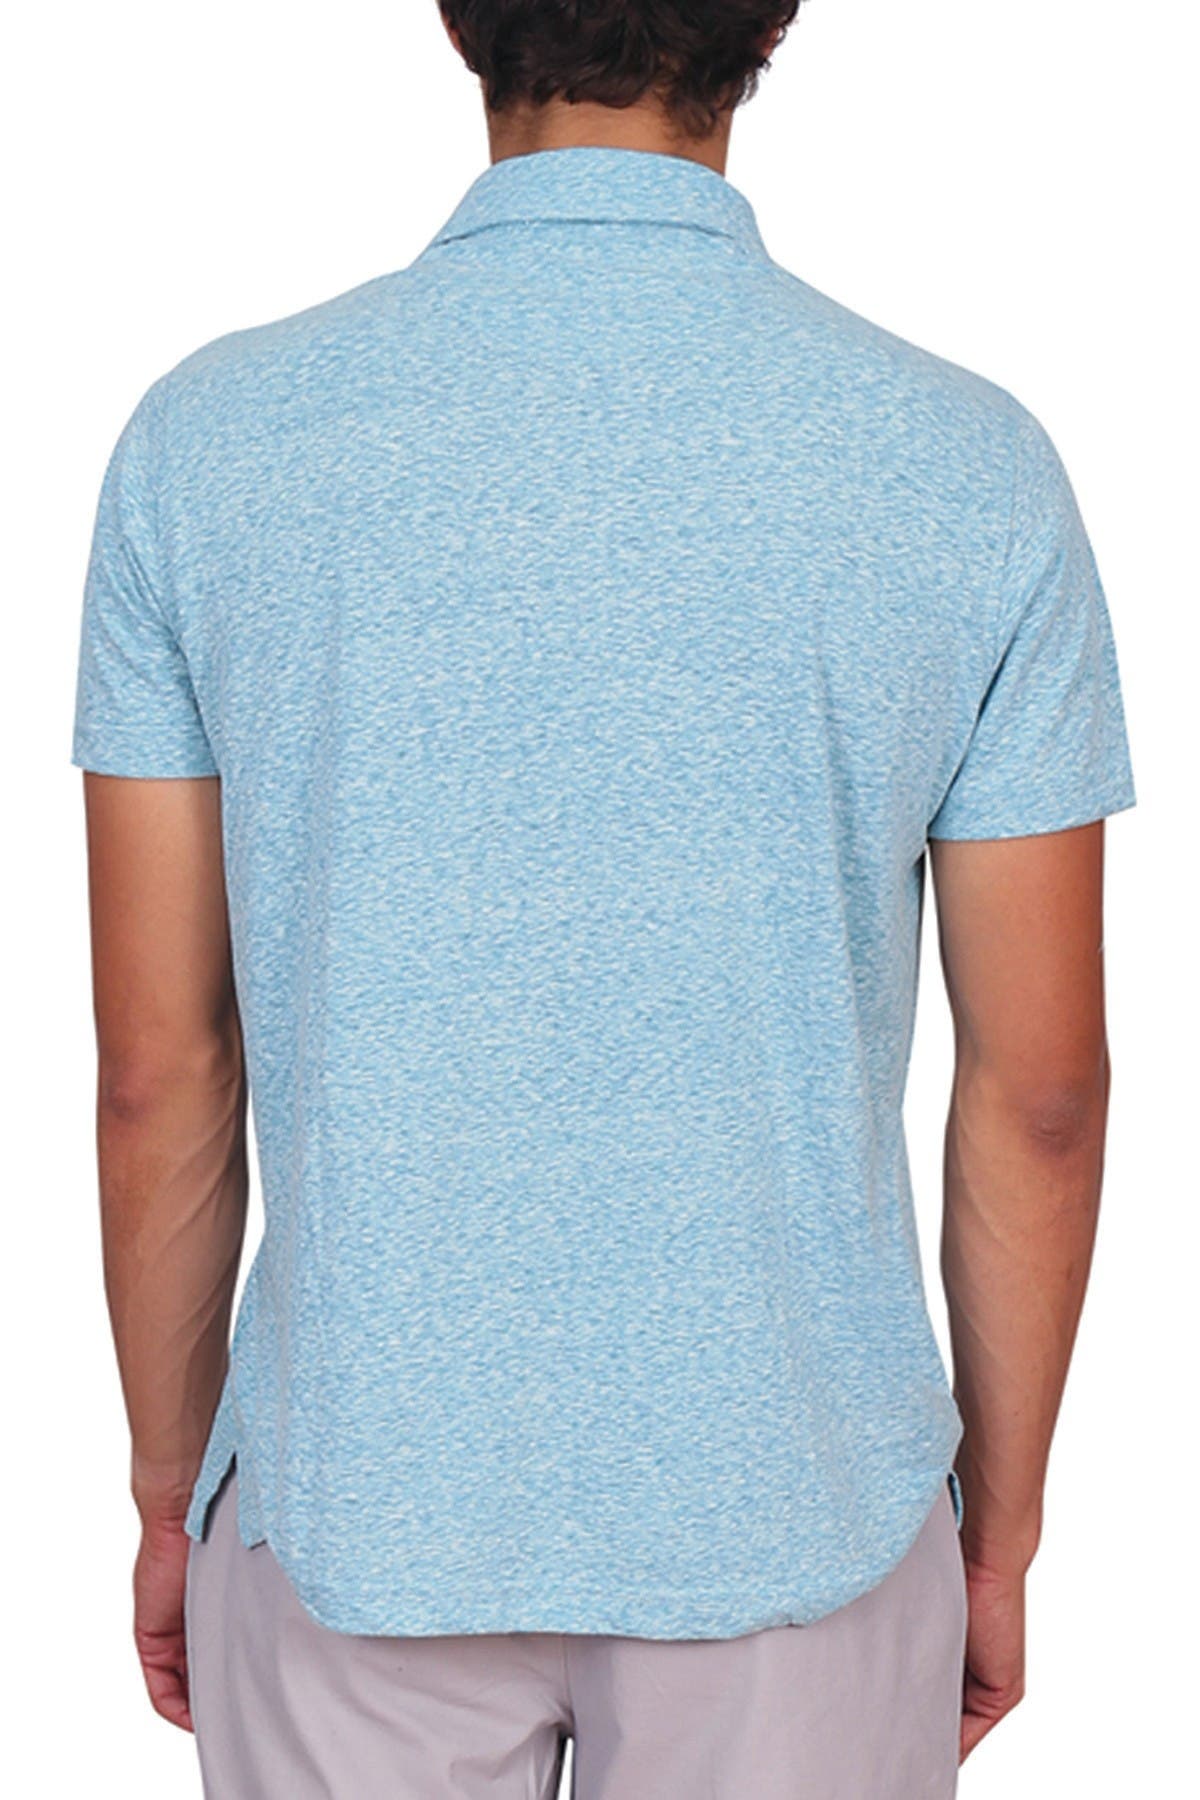 Tailorbyrd Melange Polo In Turquoise/aqua7